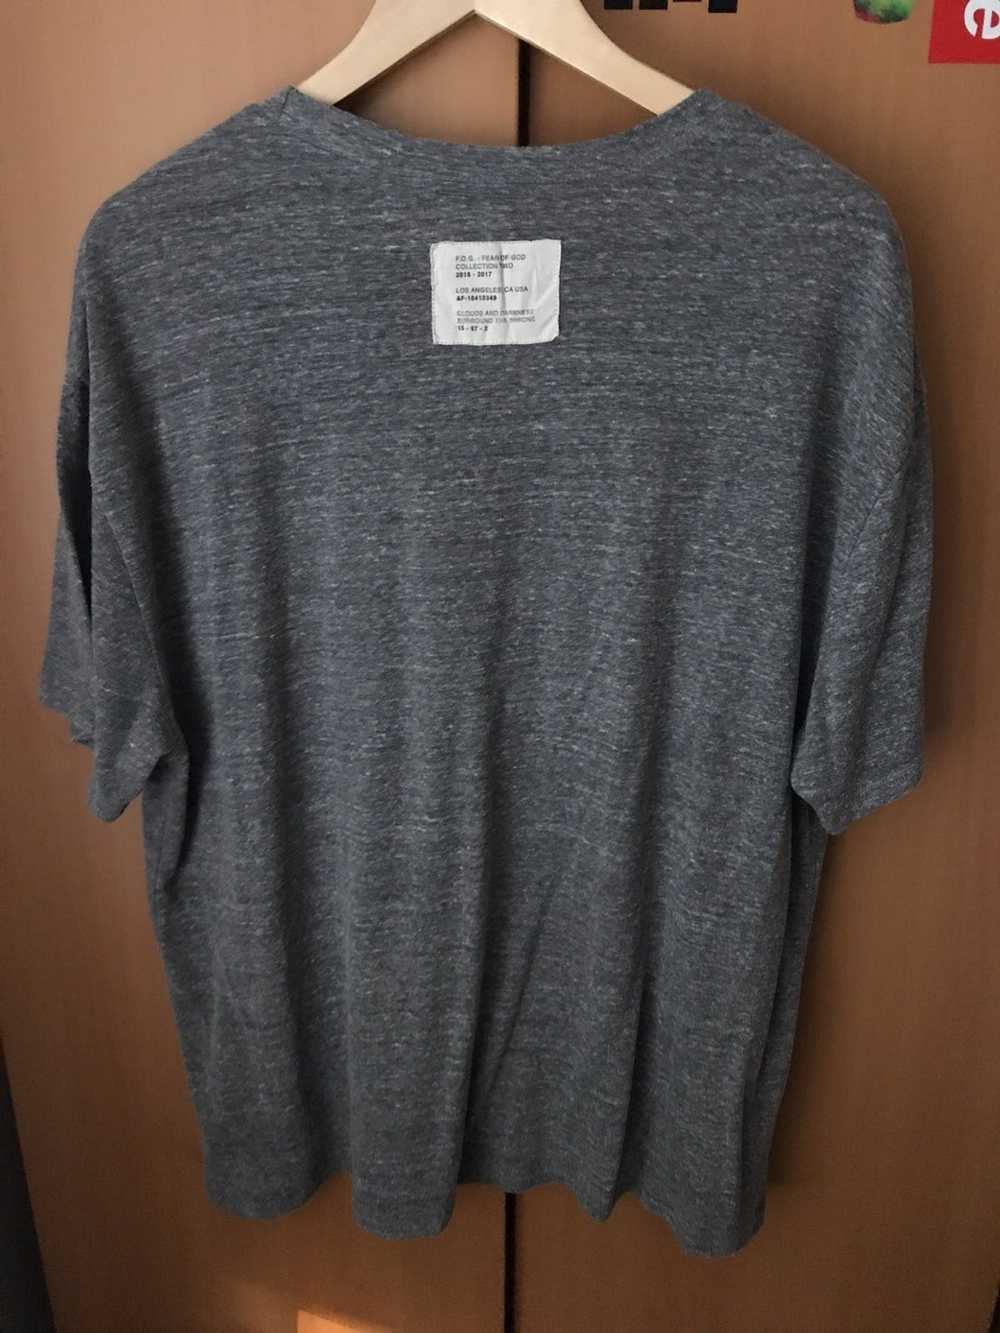 FOG × Pacsun Collection Two Grey Basic T Shirt Tee - image 2